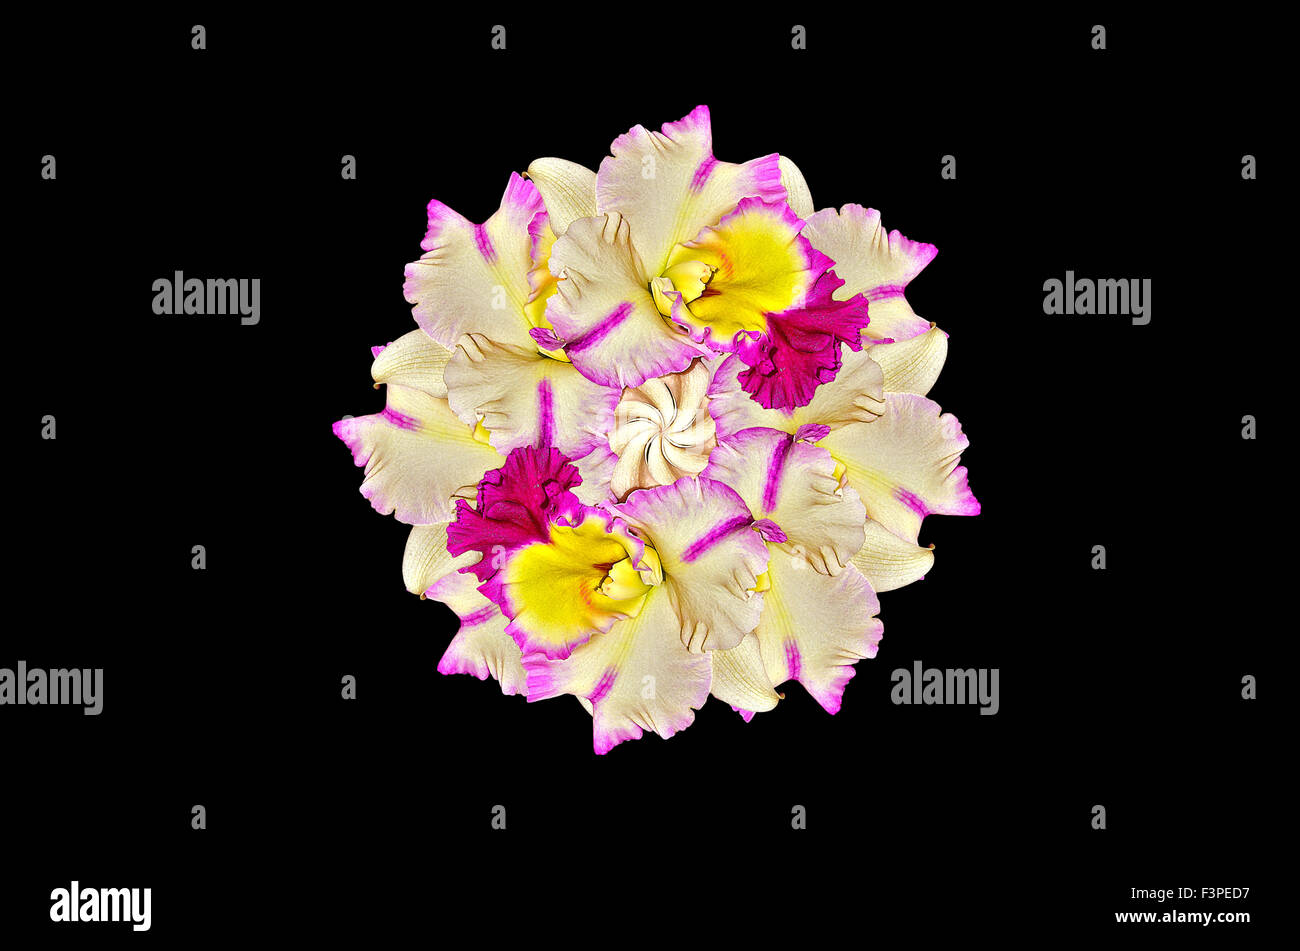 Cattleya Orchid on black background Stock Photo